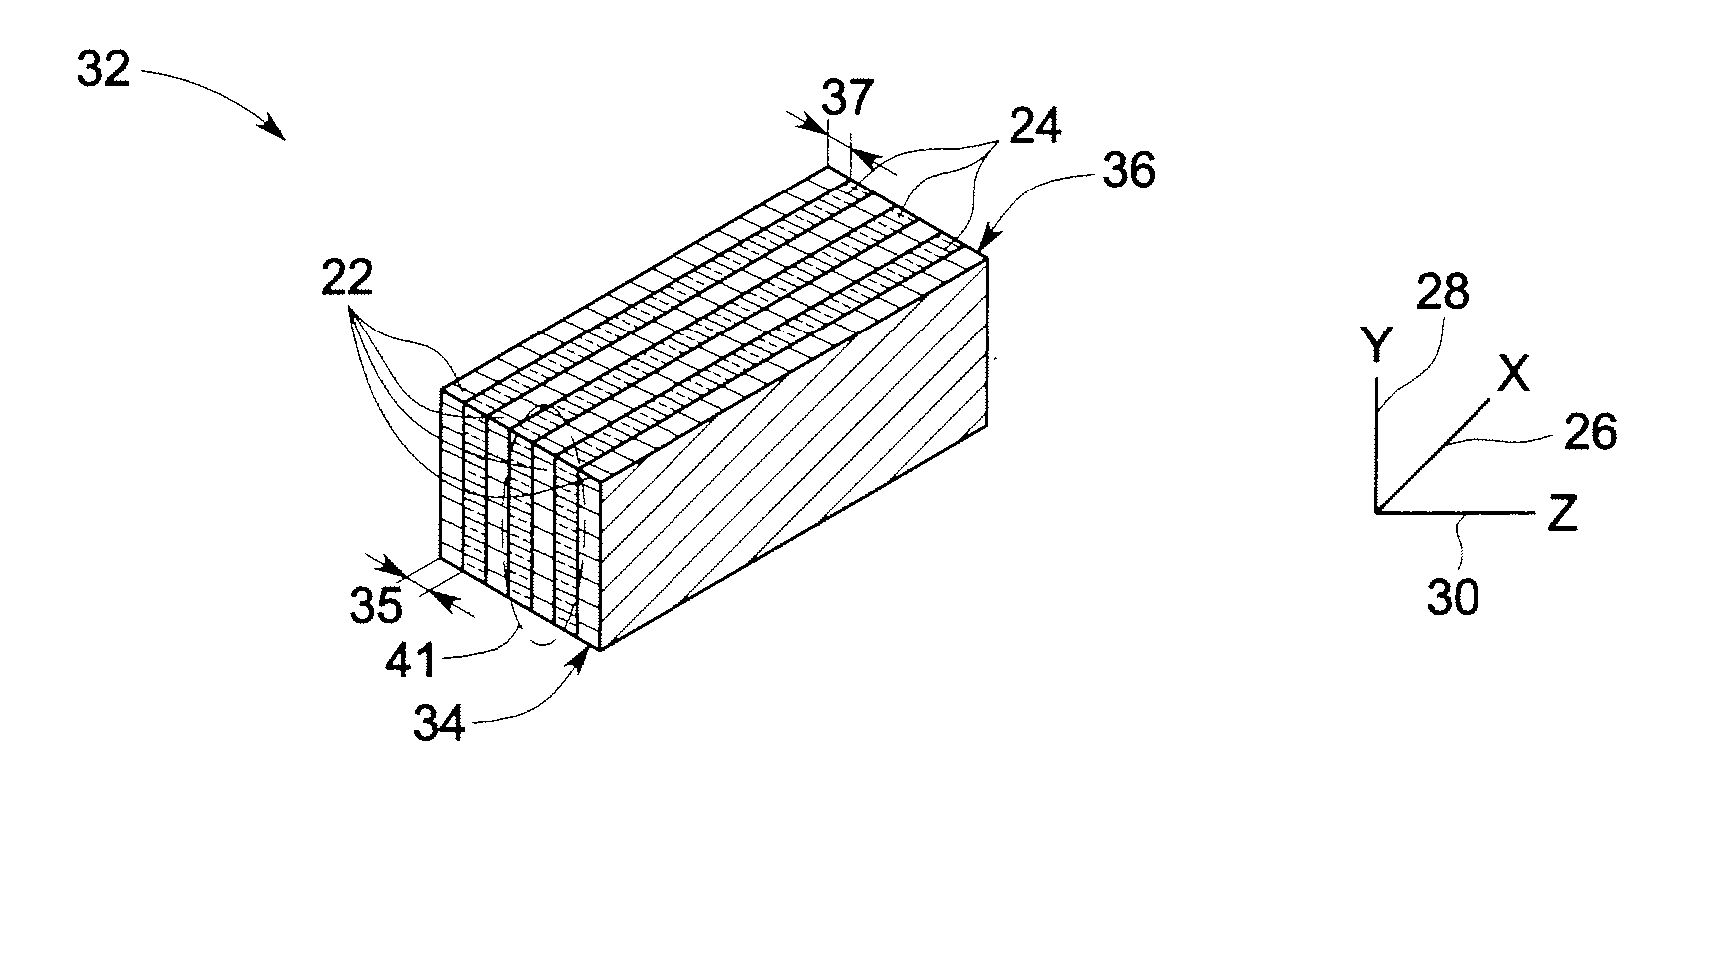 Thermal transport structure